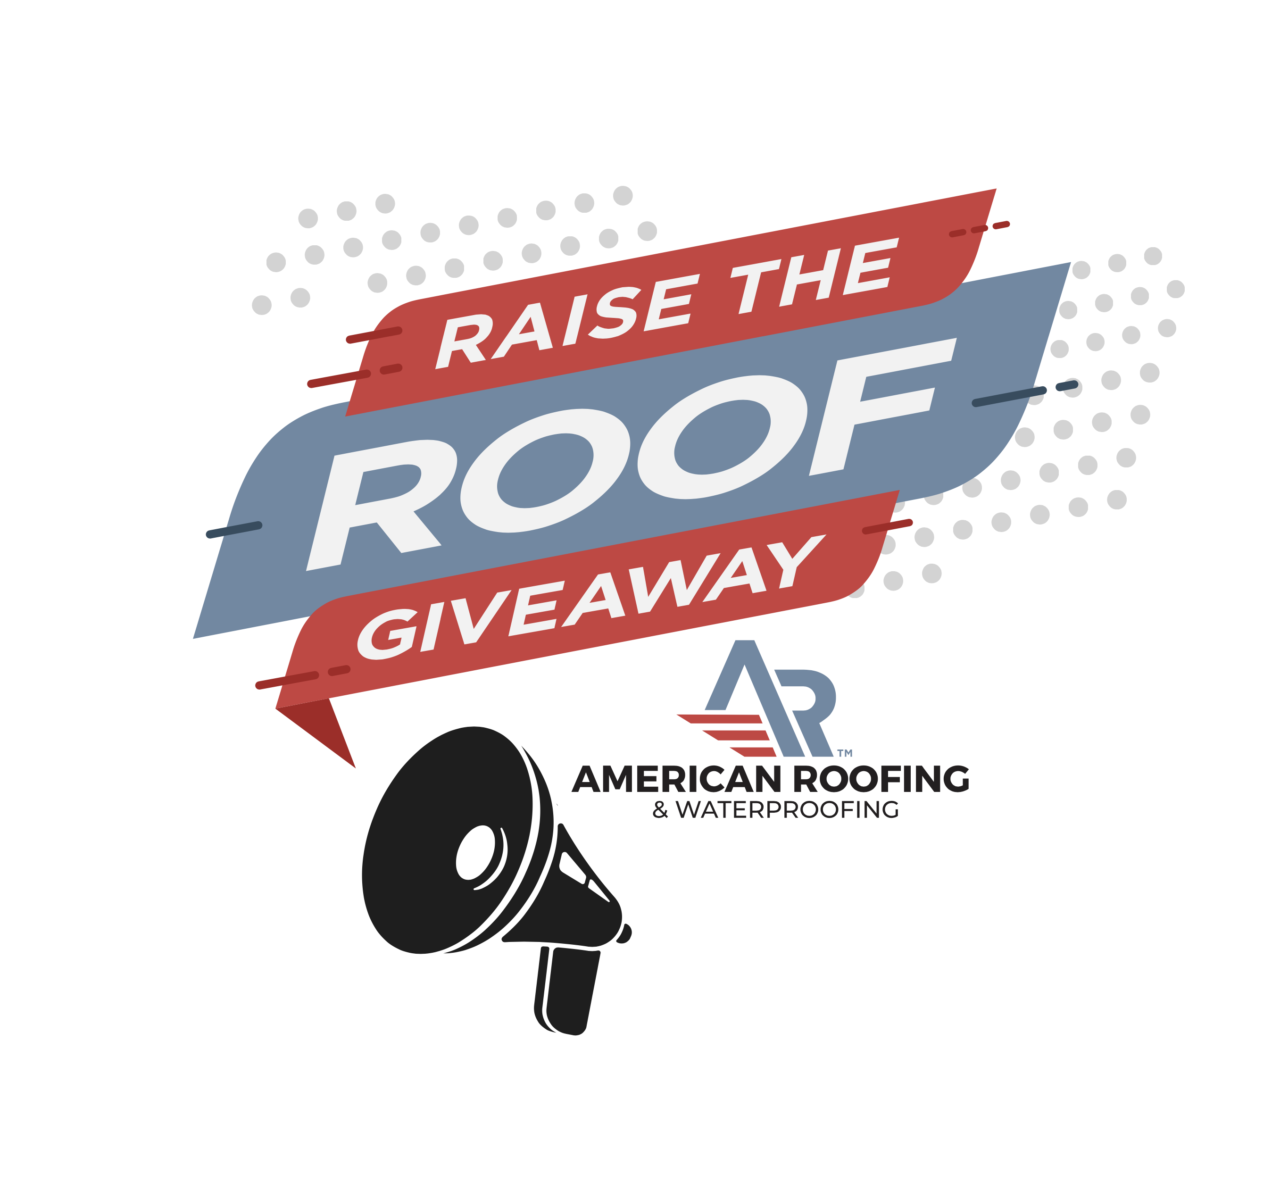 https://americanroofingnow.com/wp-content/uploads/raise-the-roof-giveaway-1280x1199.png